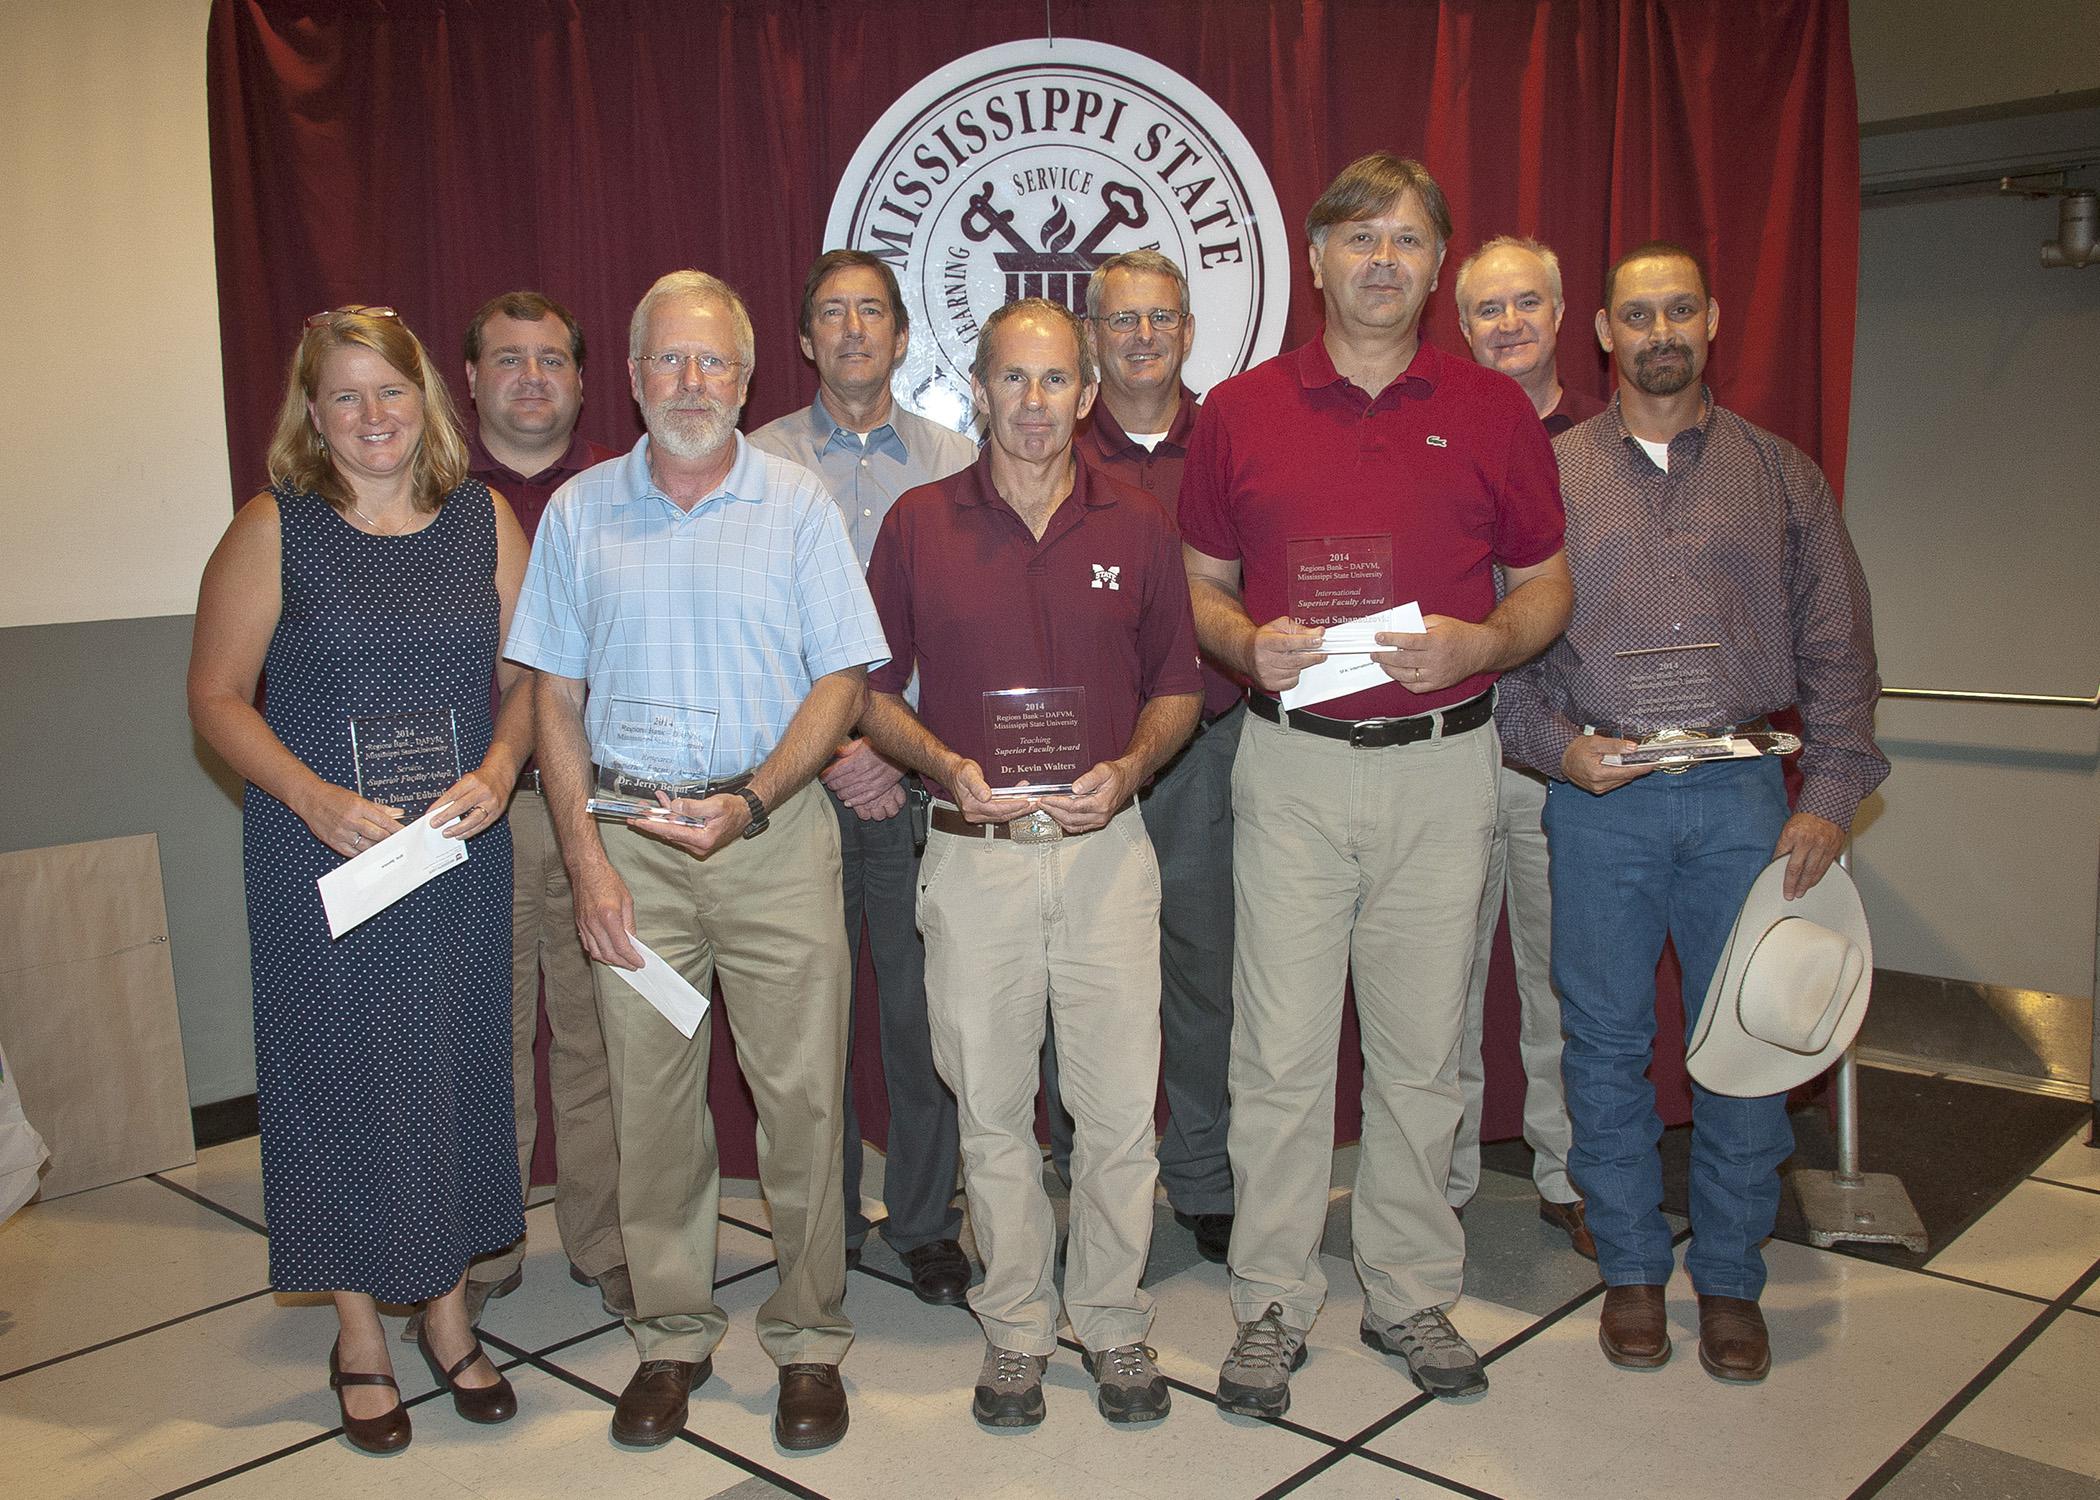 Regions Bank representatives joined Mississippi State University Division of Agriculture, Forestry and Veterinary Medicine administrators and faculty to recognize the winners of the 2014 Regions Bank-DAFVM, MSU Superior Faculty Awards on July 25, 2014. Back row, from left: Walt Stephens, Regions Greenville City president; Gregory Bohach, DAFVM vice president; Samuel W. Slaughter III, Regions Starkville City president; and George Jarman, Regions Delta City president. Front row, from left: Service Award winne